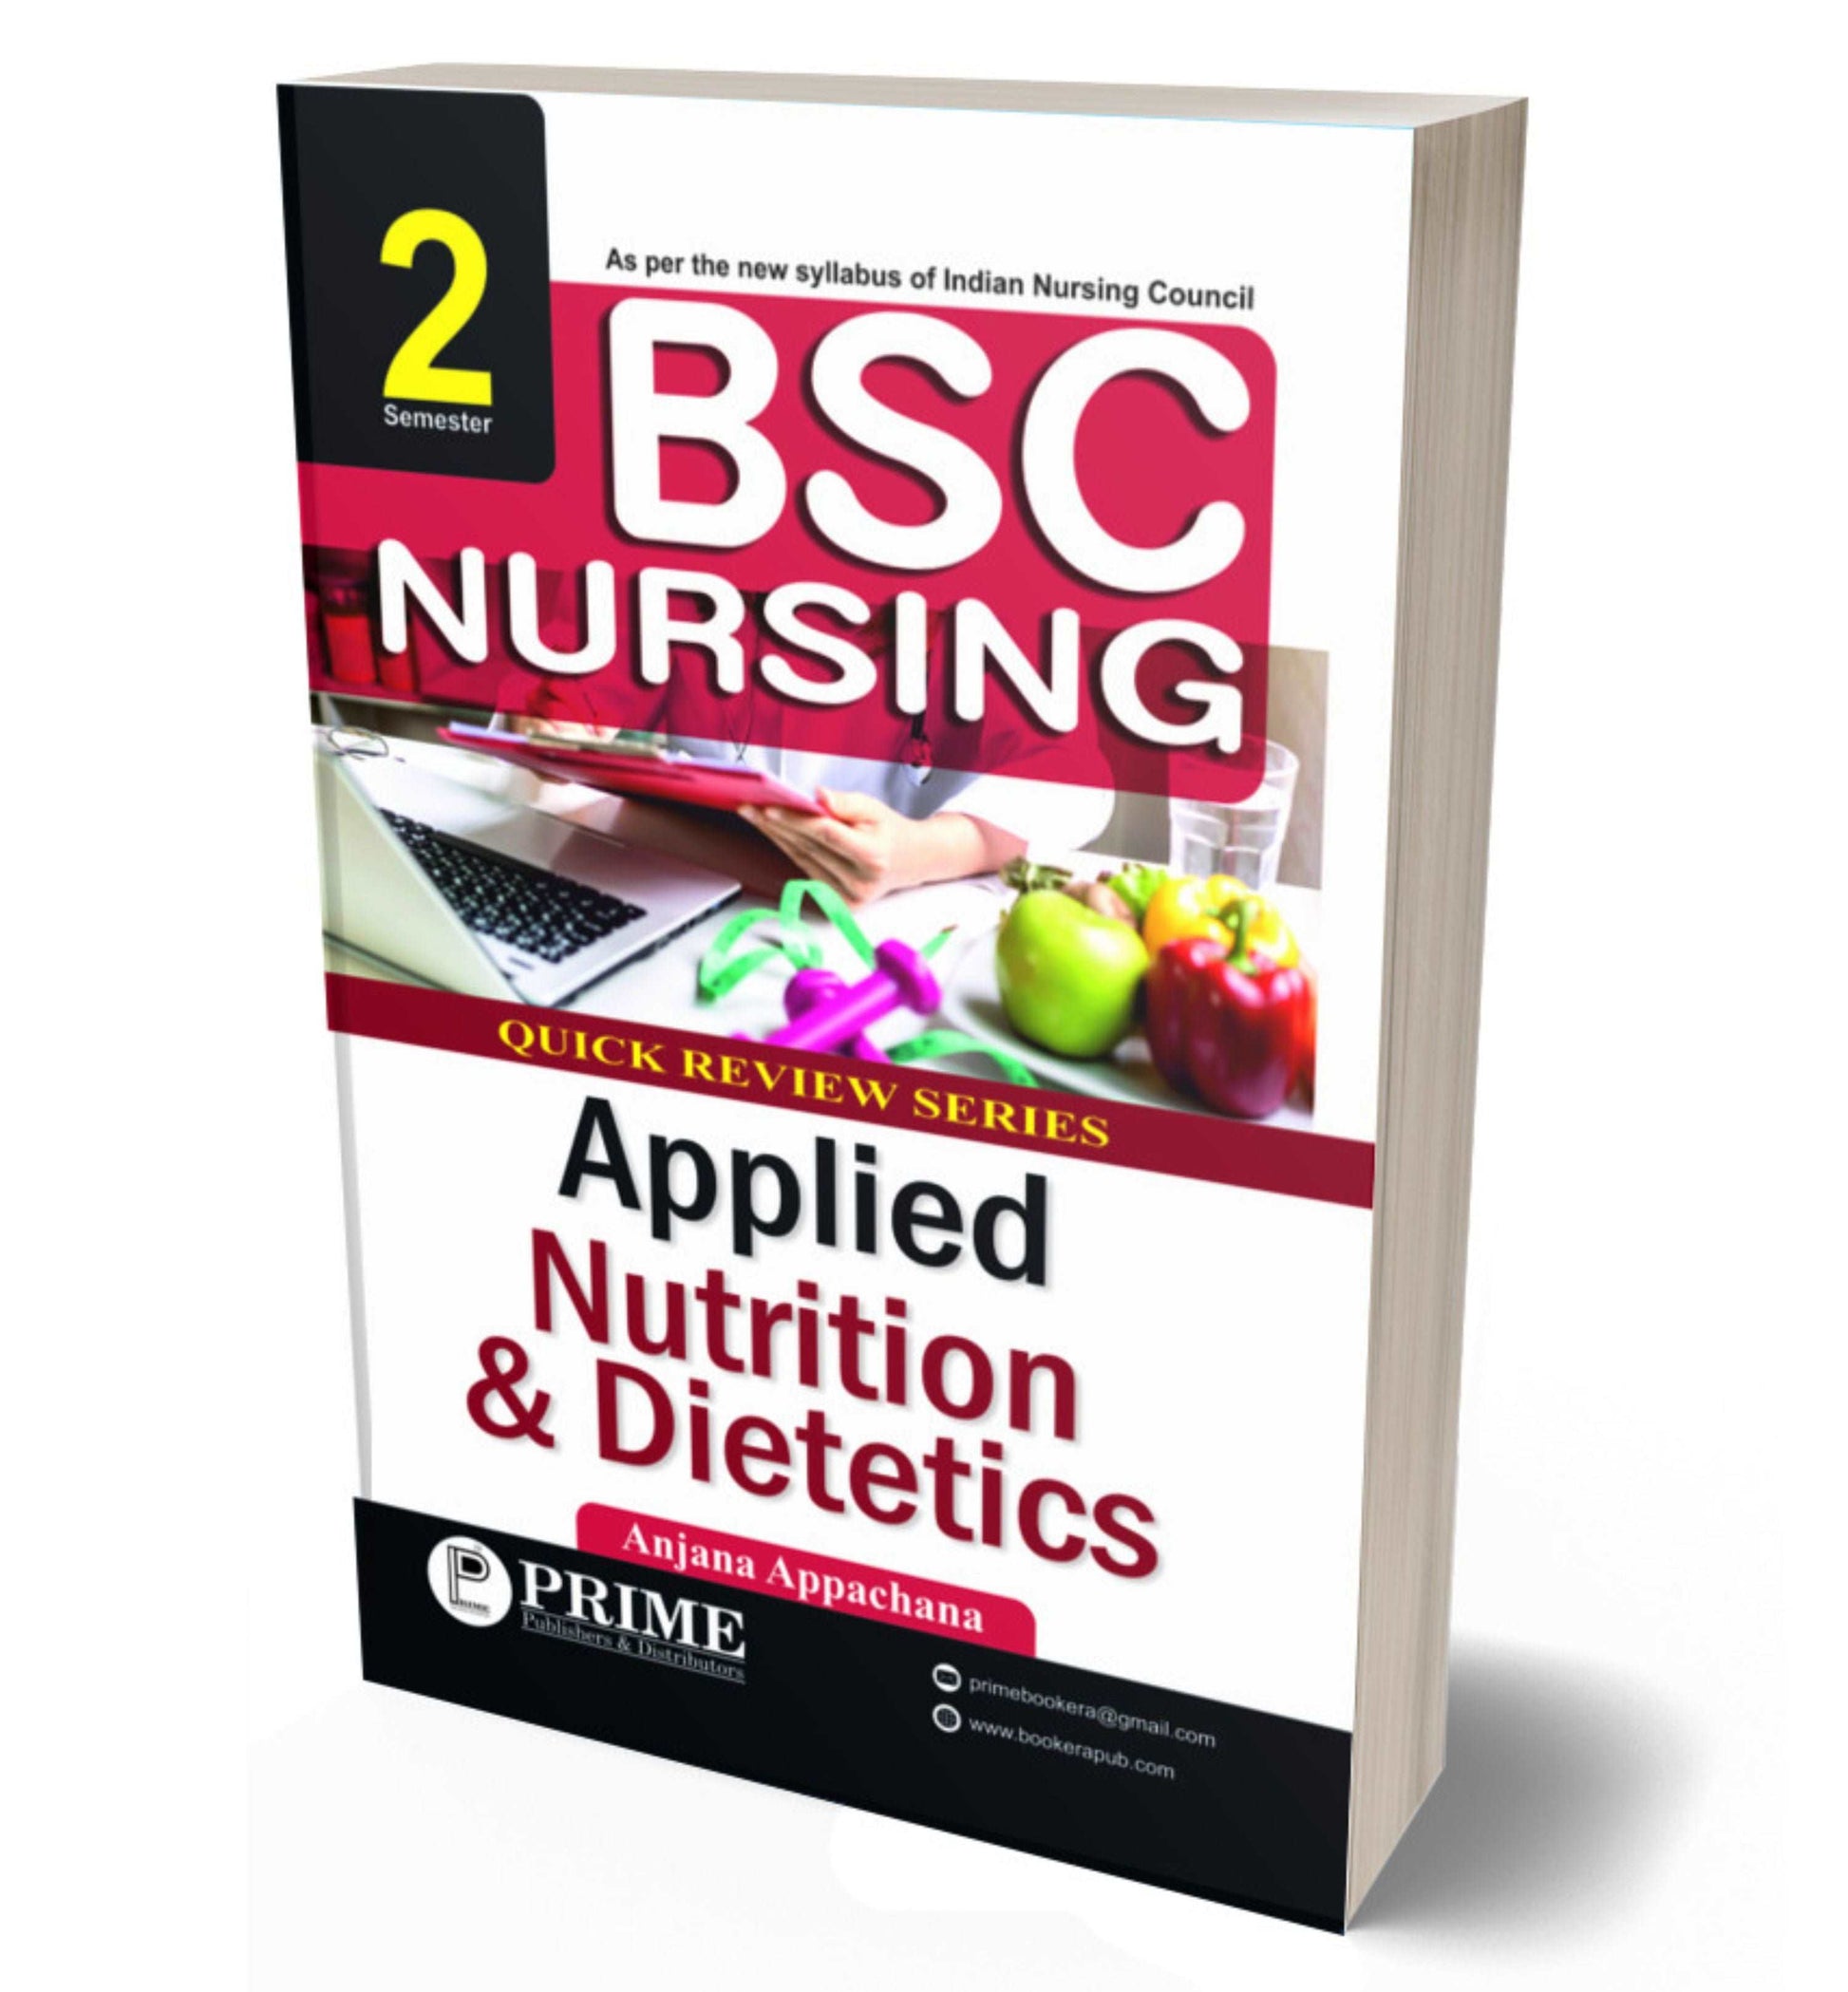 Quick Review Series of Applied Nutrition & Dietetics